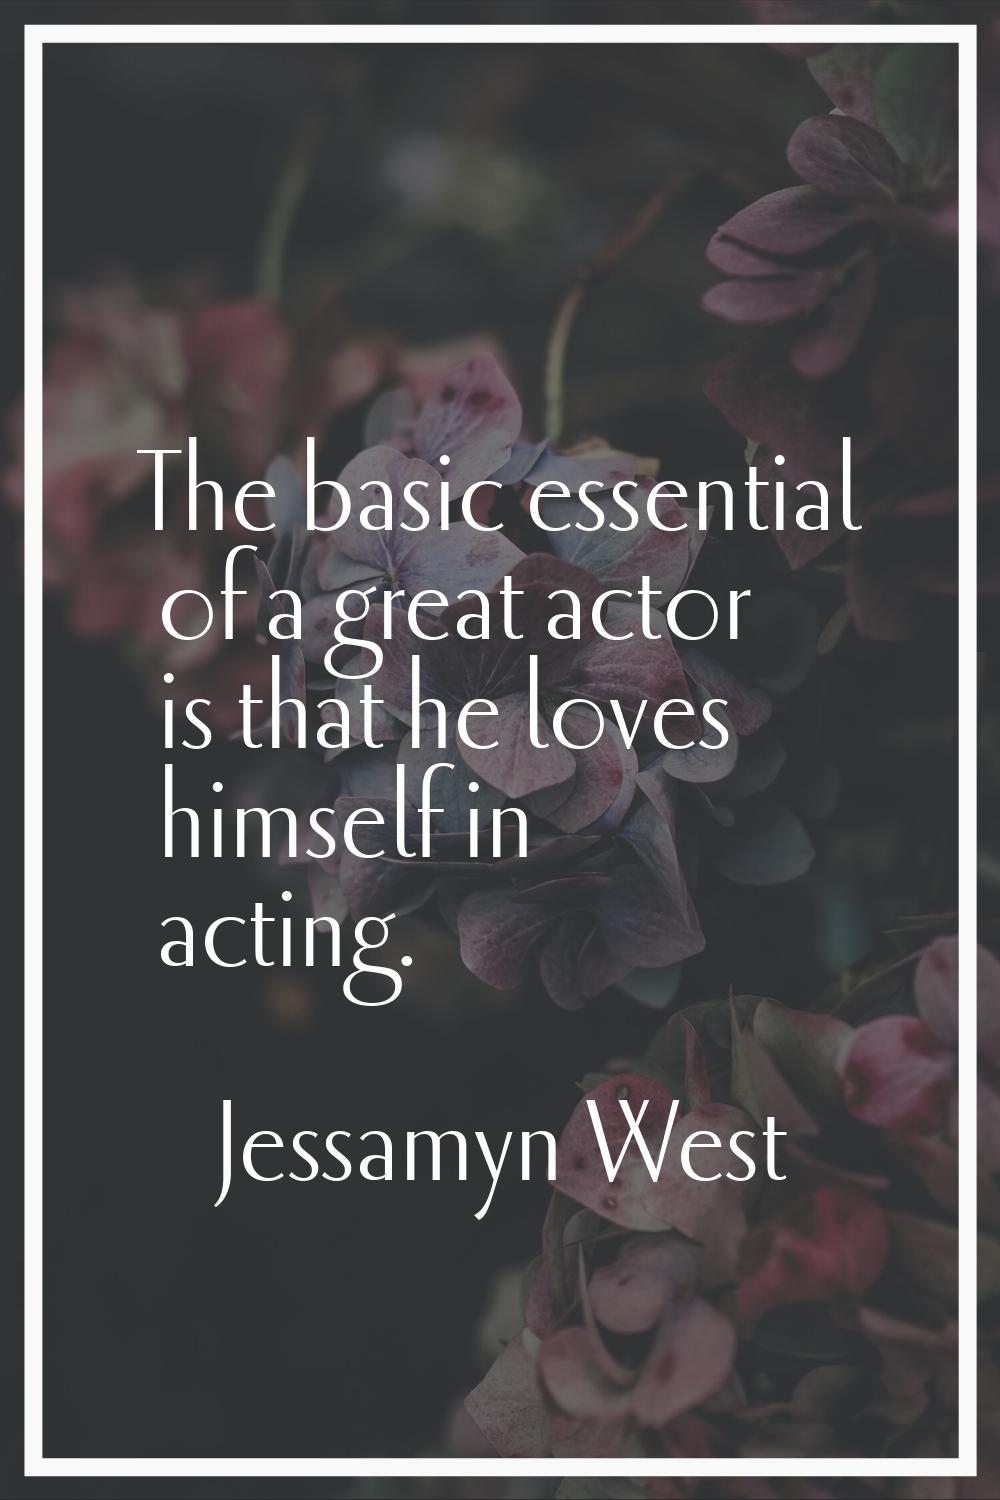 The basic essential of a great actor is that he loves himself in acting.